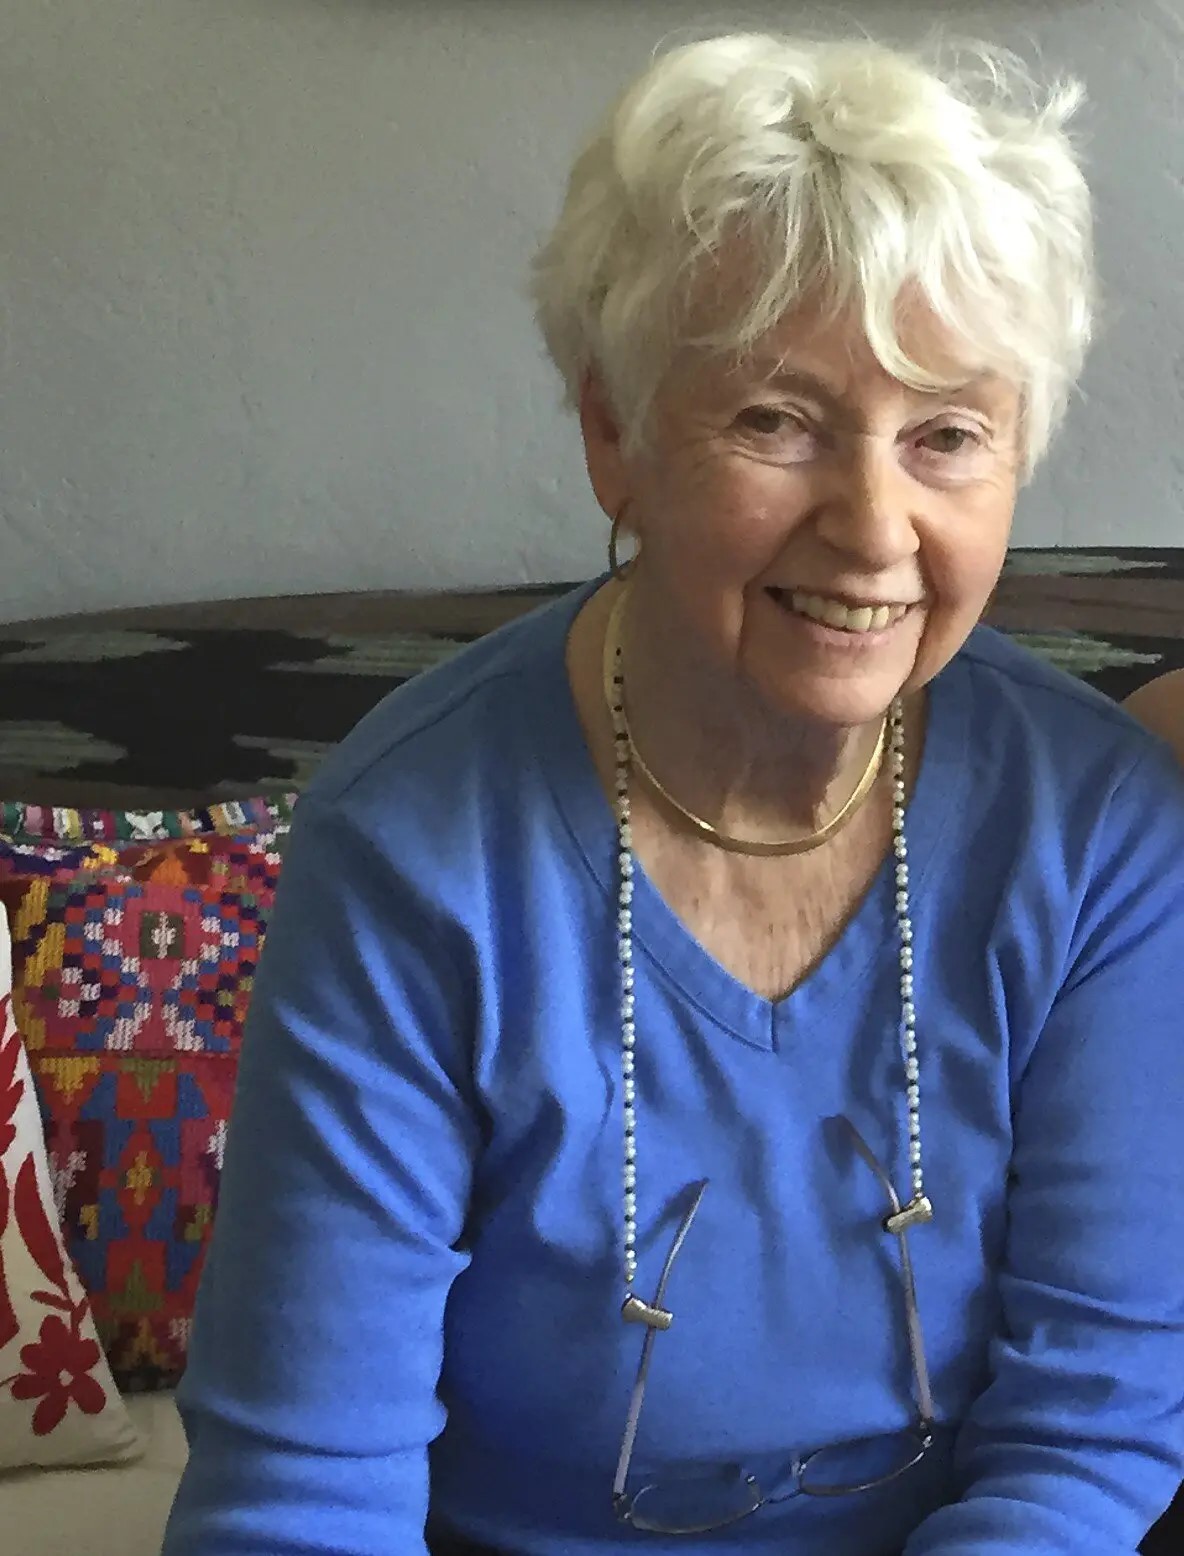 Author Eve Bunting. Photo shows an older white woman with short white hair, wearing a long sleeved blue shirt and a long chain around her neck.